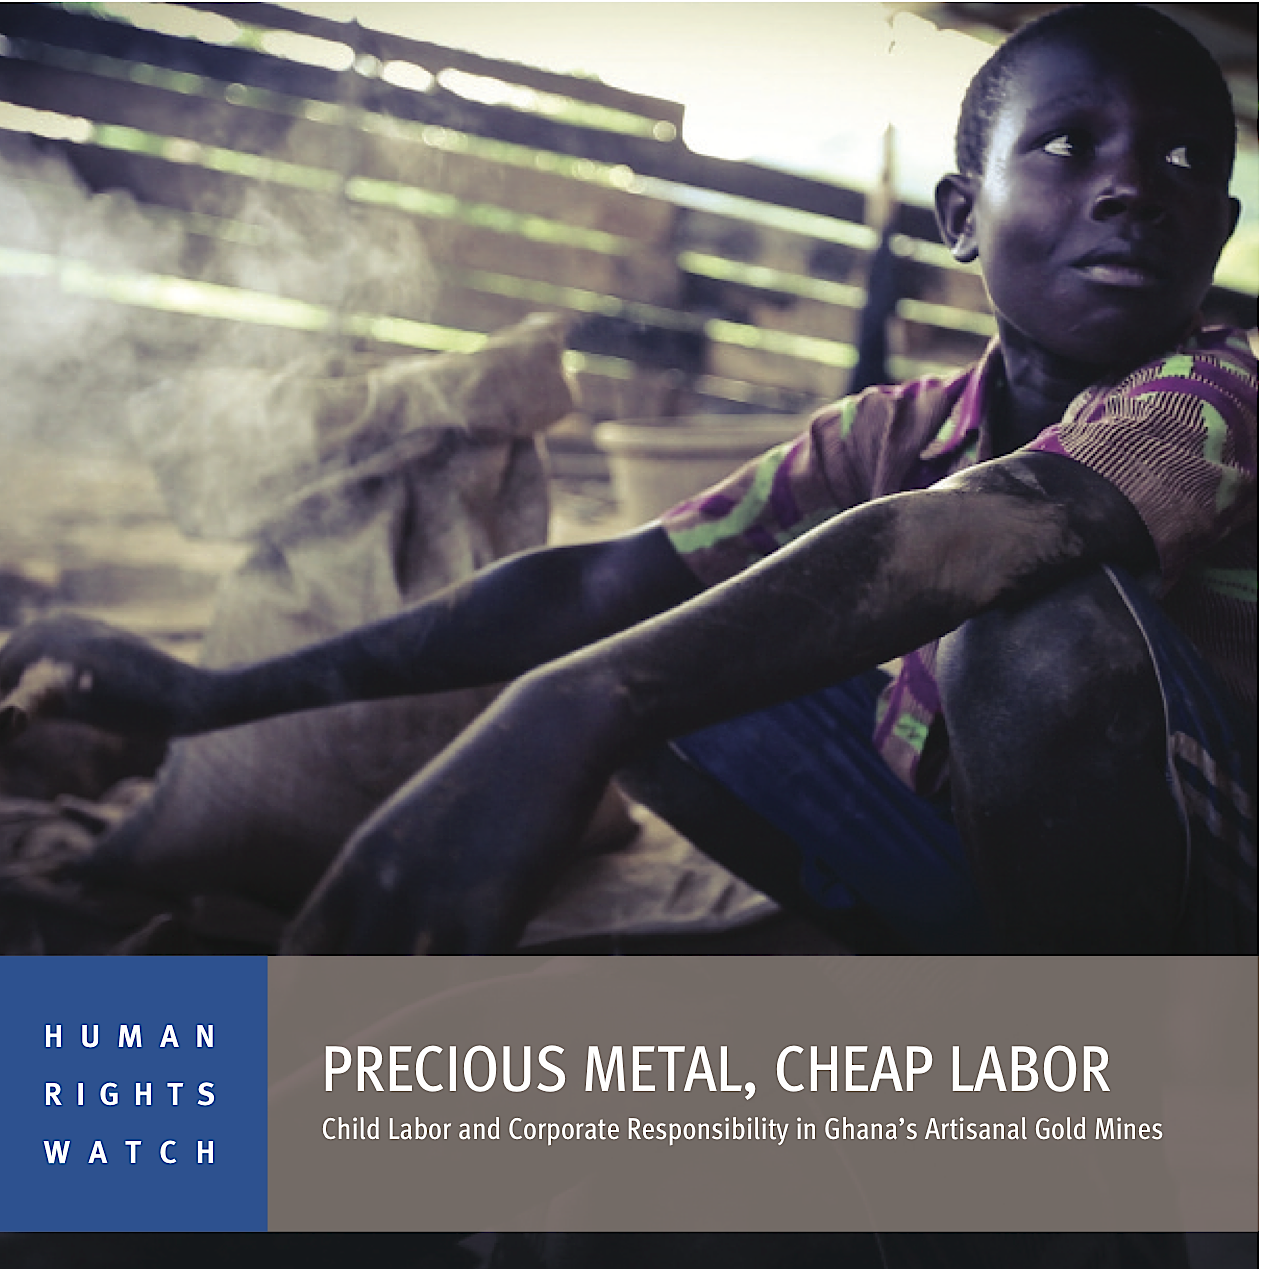 New Report Says Child Labor Taints Ghana’s Gold